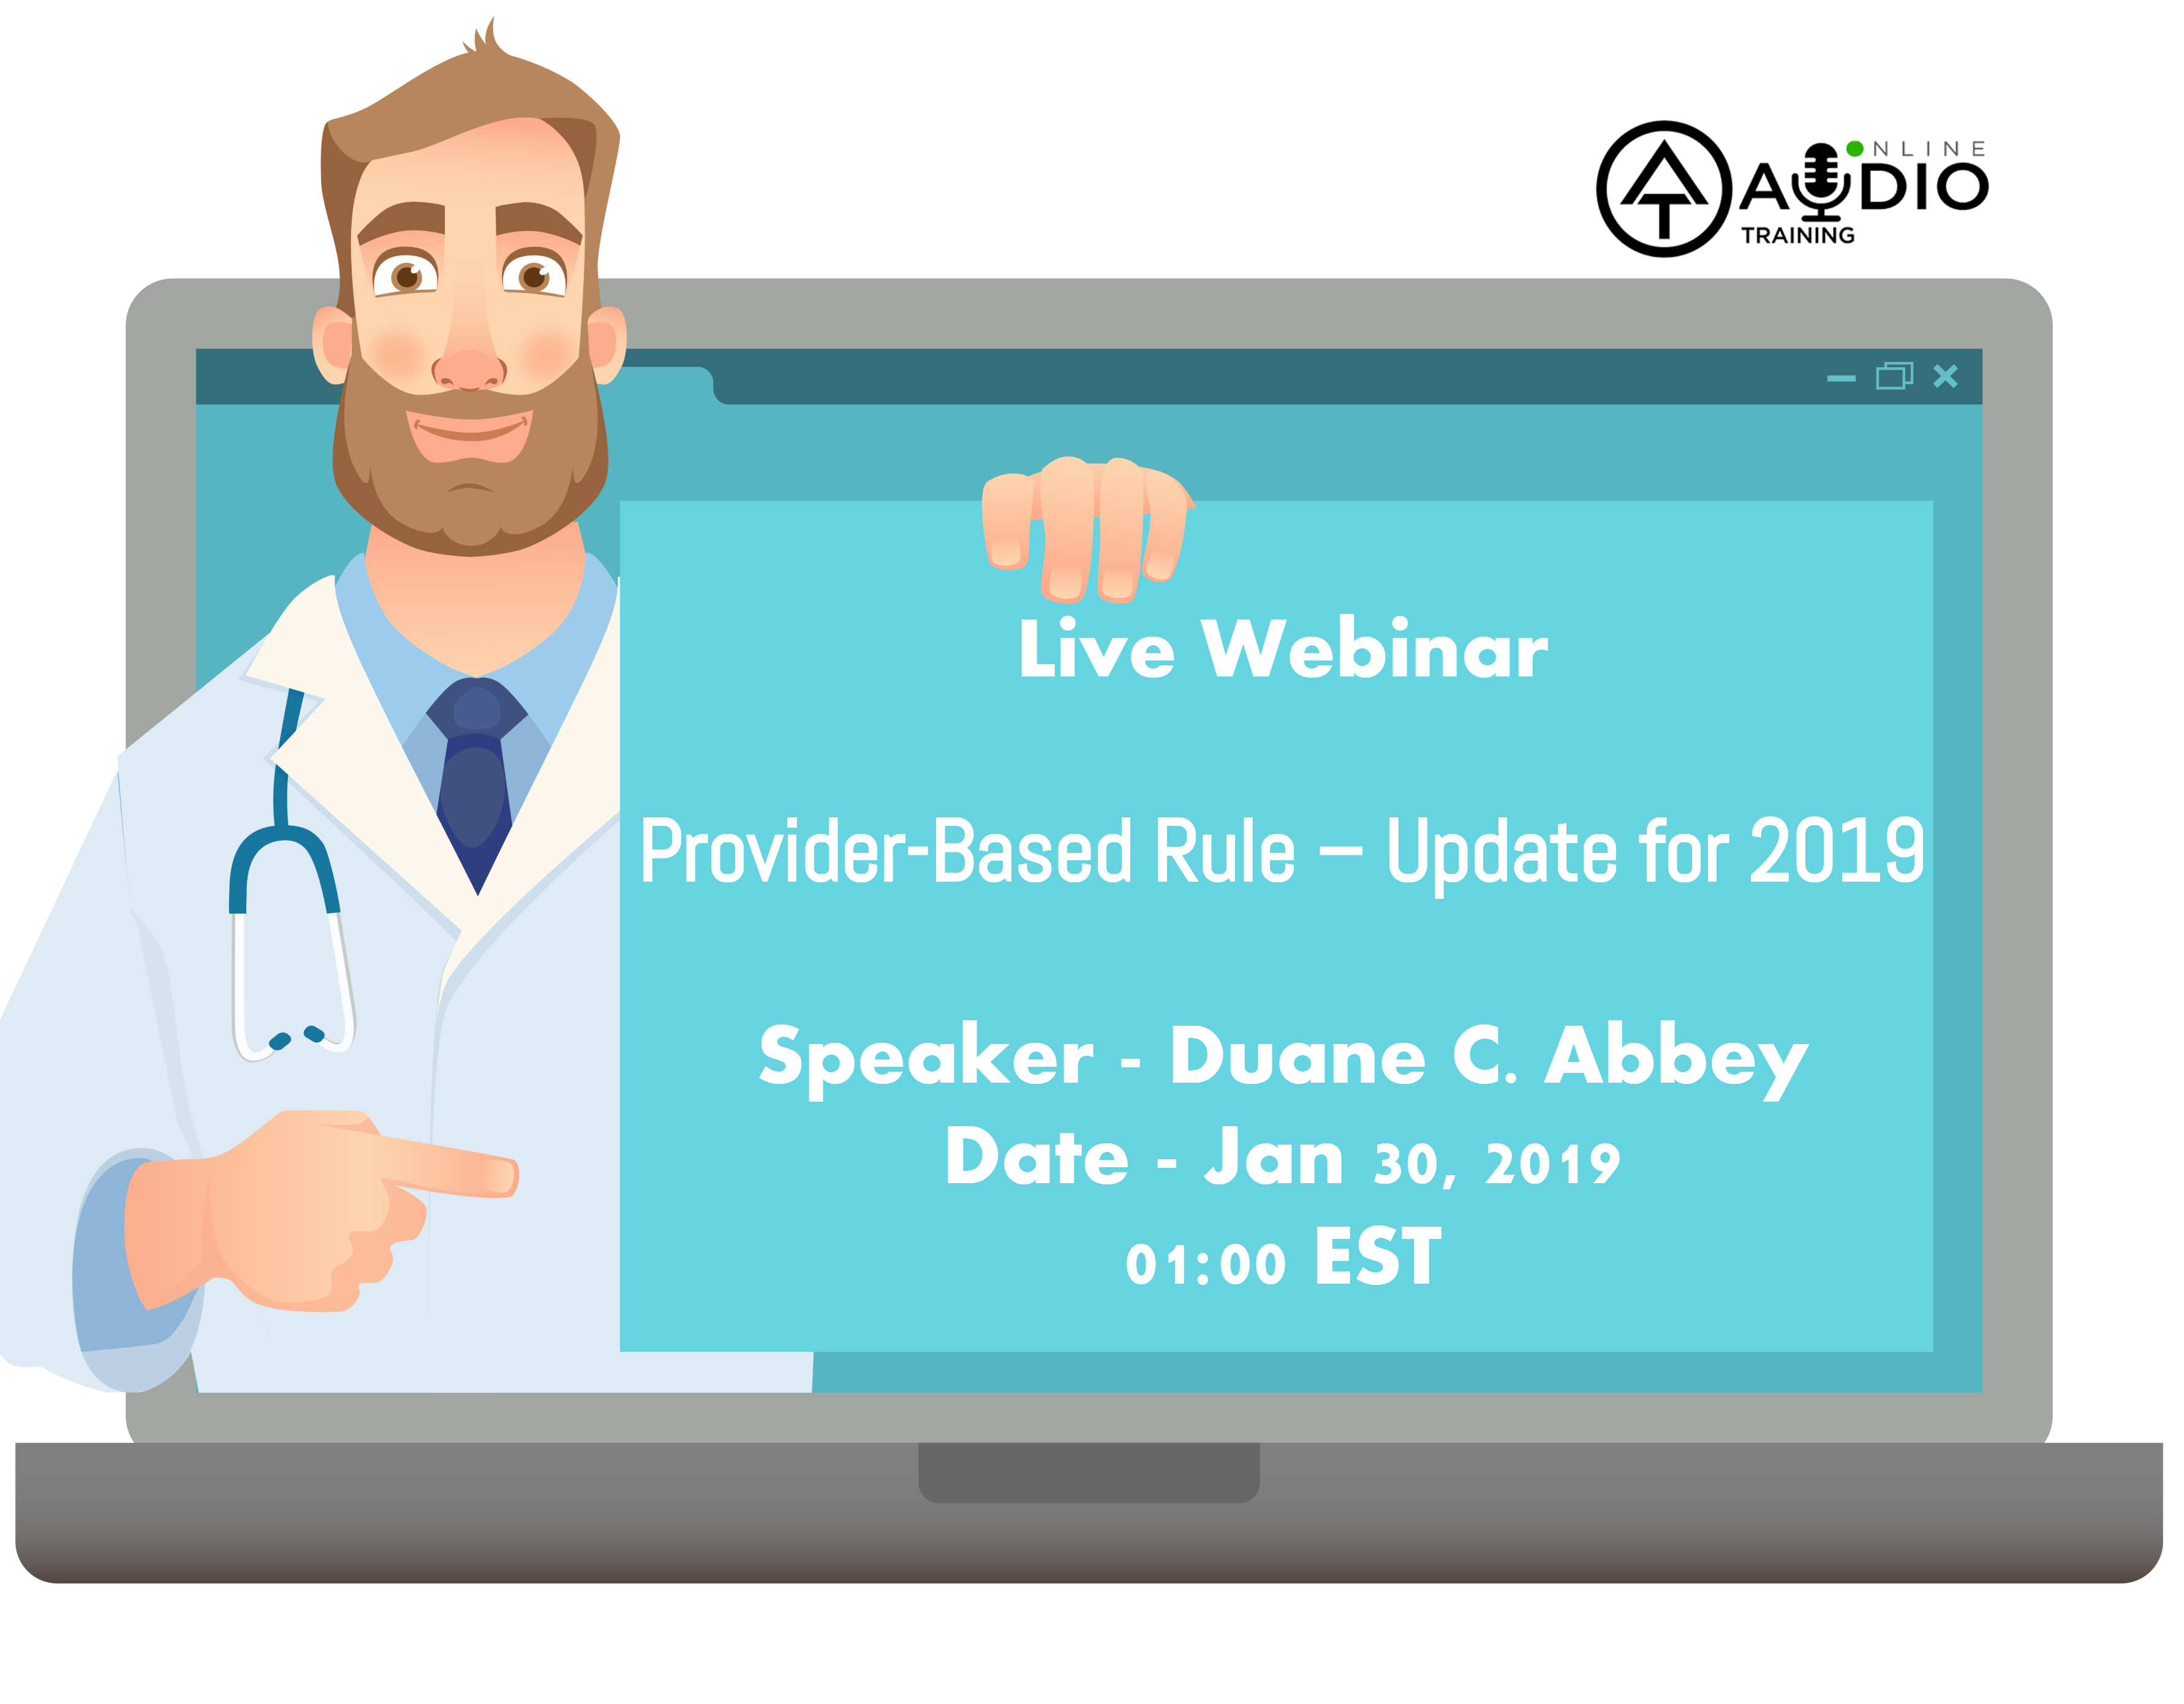 Provider-Based Rule – Update for 2019 by Duane C. Abbey, Los Angeles, California, United States